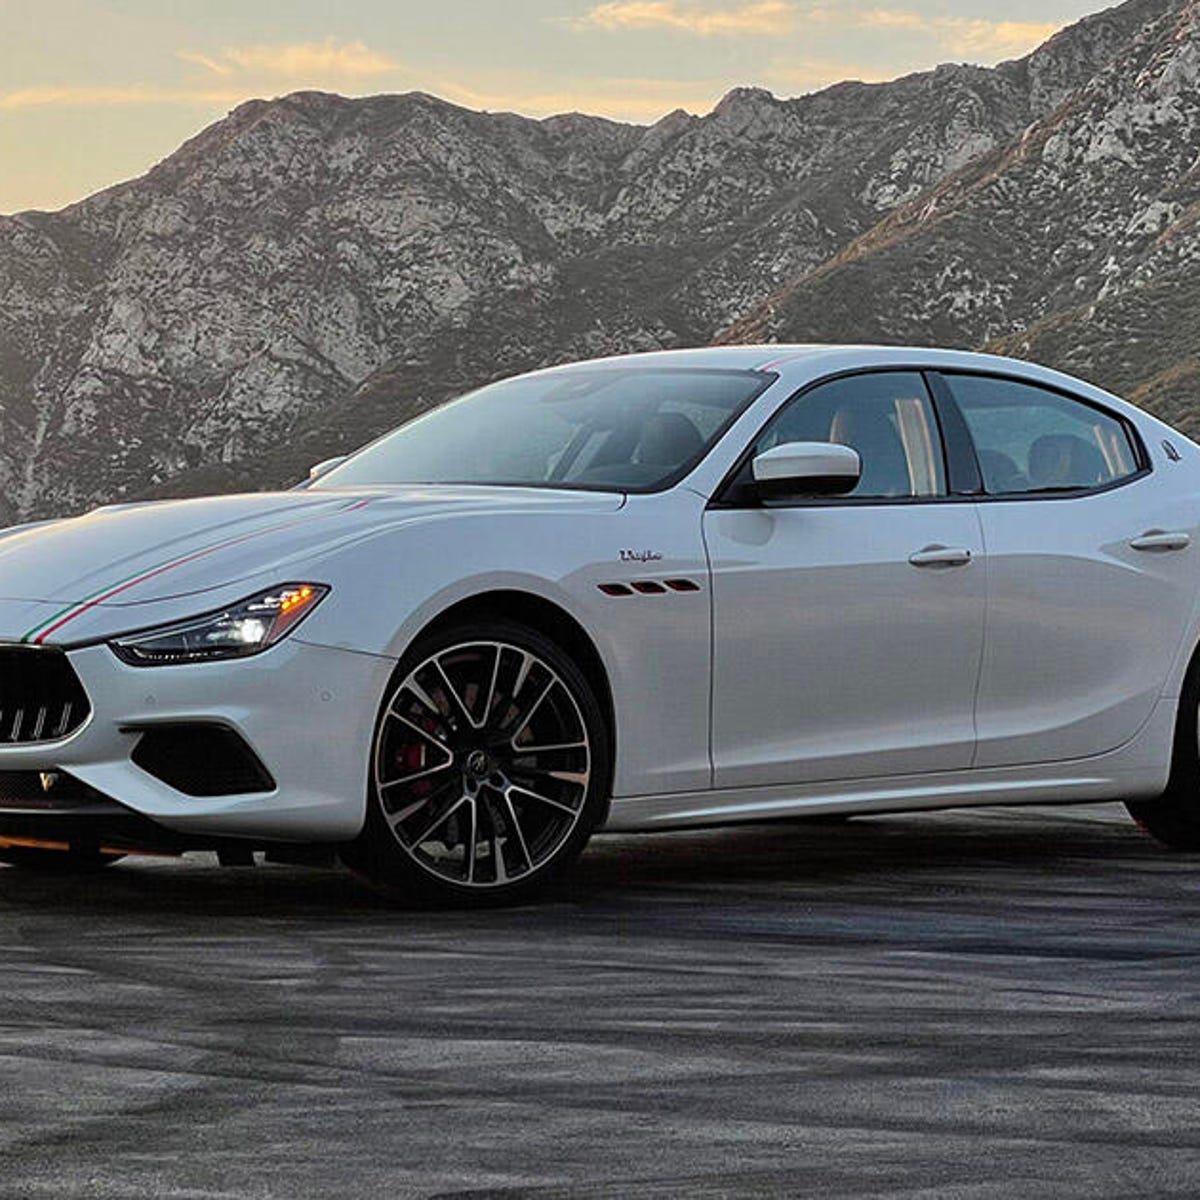 Maserati Ghibli set to depart after 2022, report says - CNET